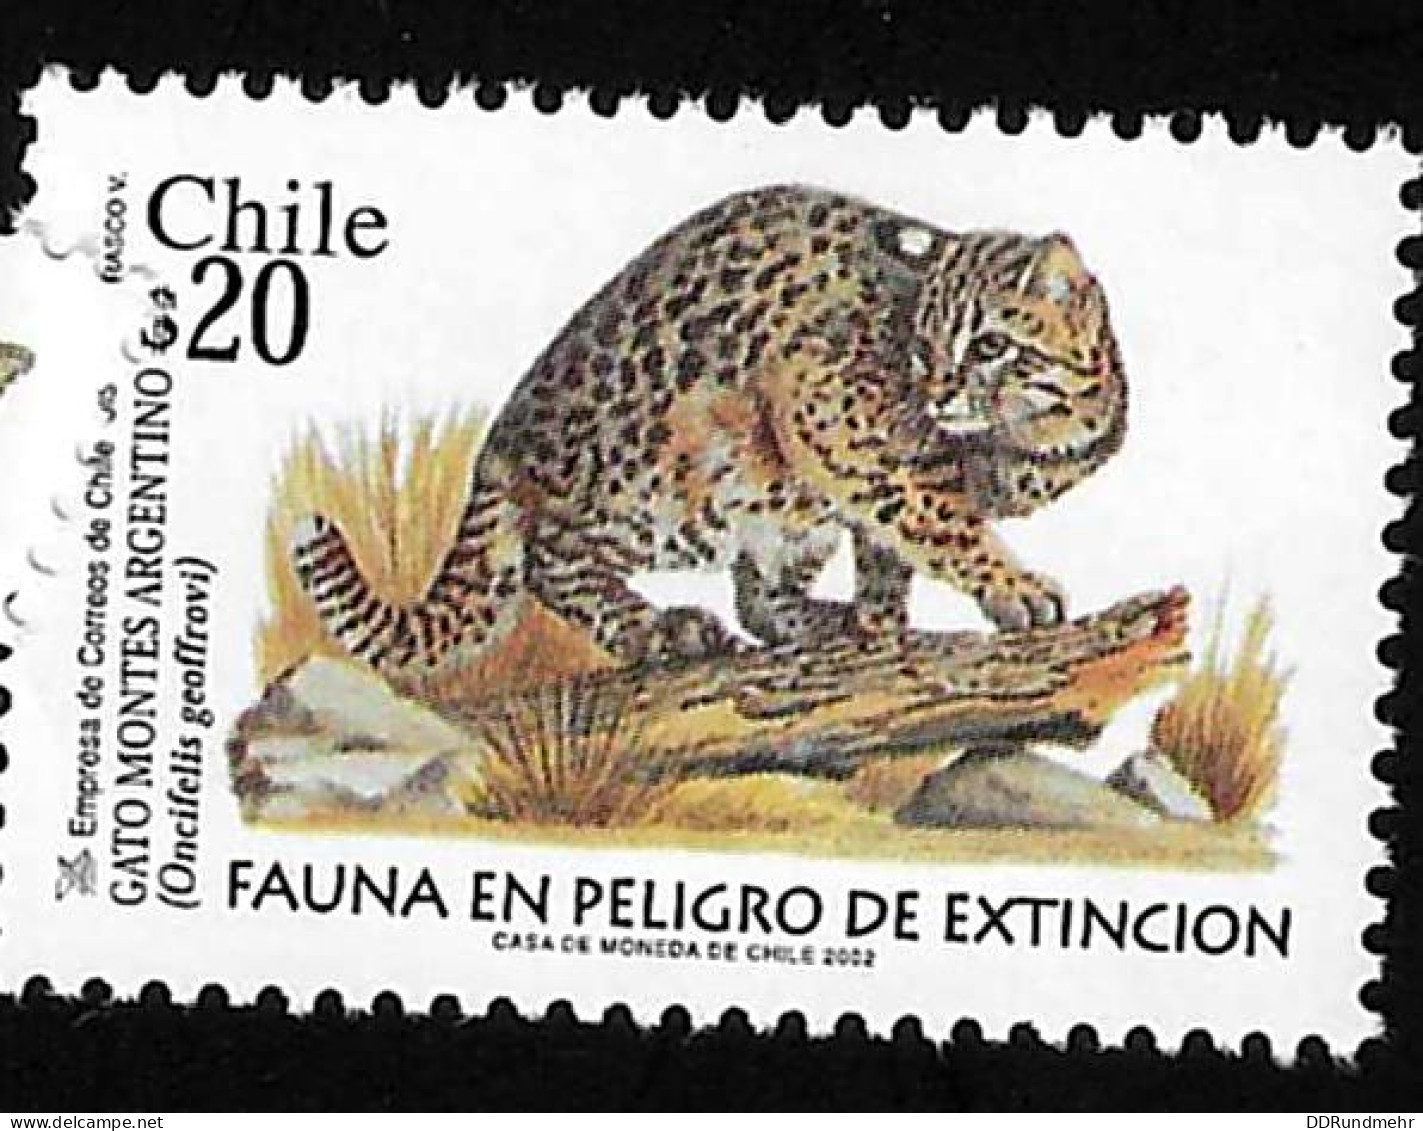 2002 Wild Cats  Michel CL 2069 - 2070 Stamp Number CL 1394 - 1395 Yvert Et Tellier CL 1636 - 1637 Xx MNH - Chile